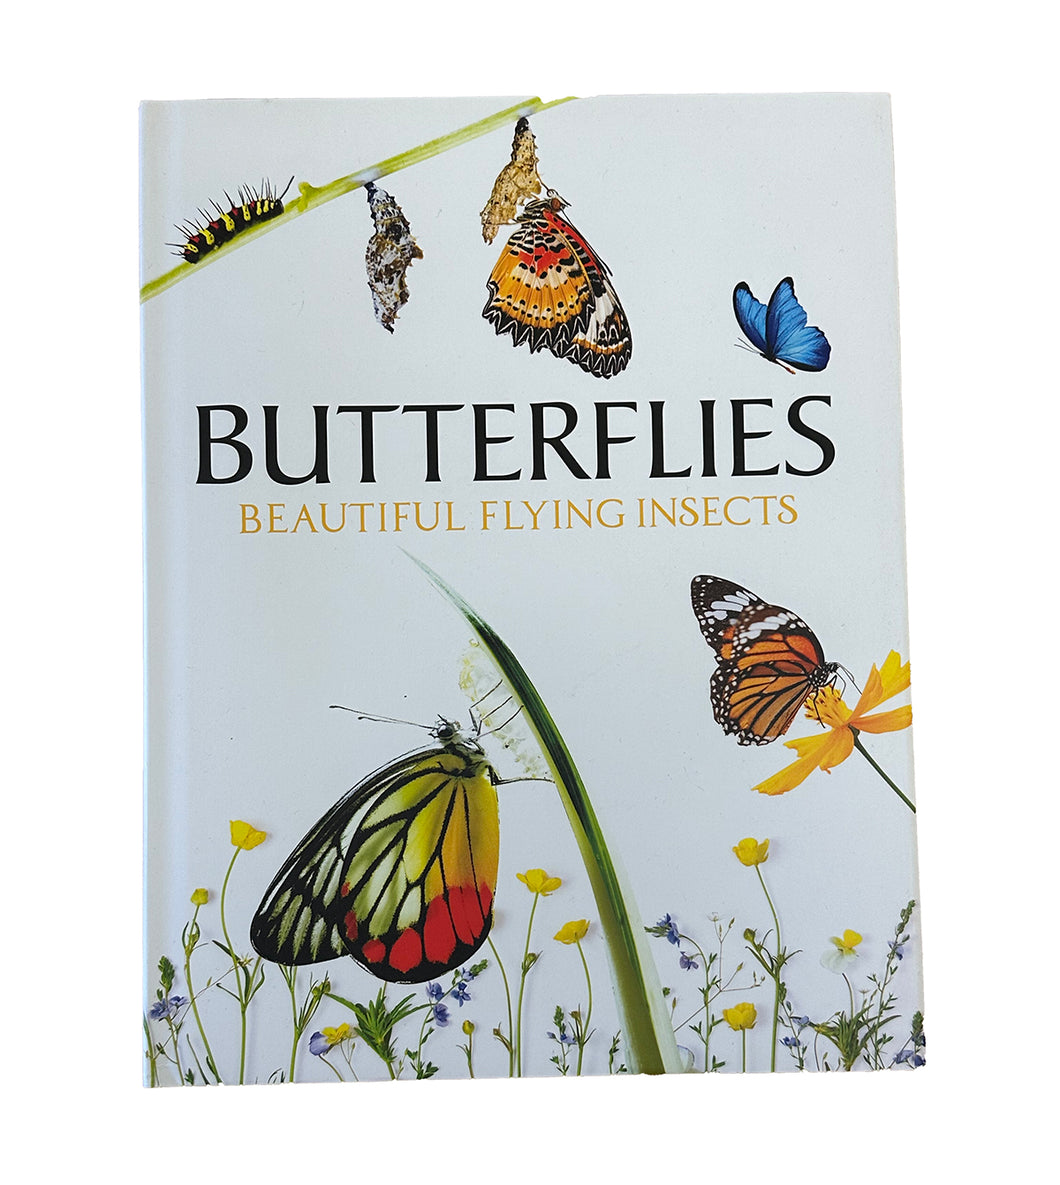 'Butterflies: Beautiful Flying Insects' table book